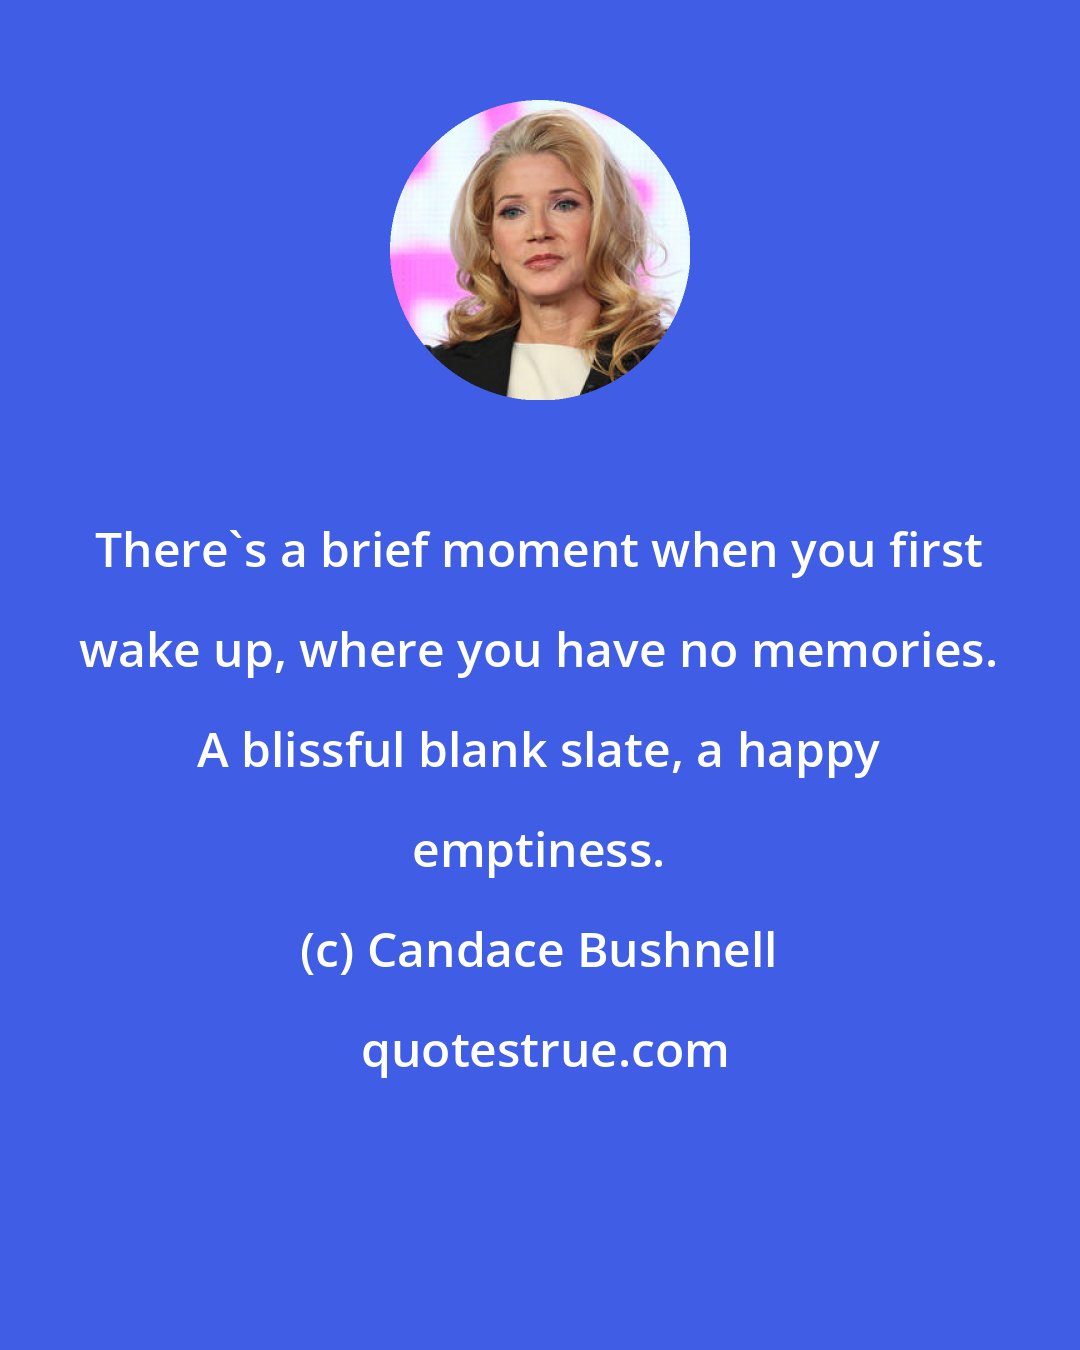 Candace Bushnell: There's a brief moment when you first wake up, where you have no memories. A blissful blank slate, a happy emptiness.